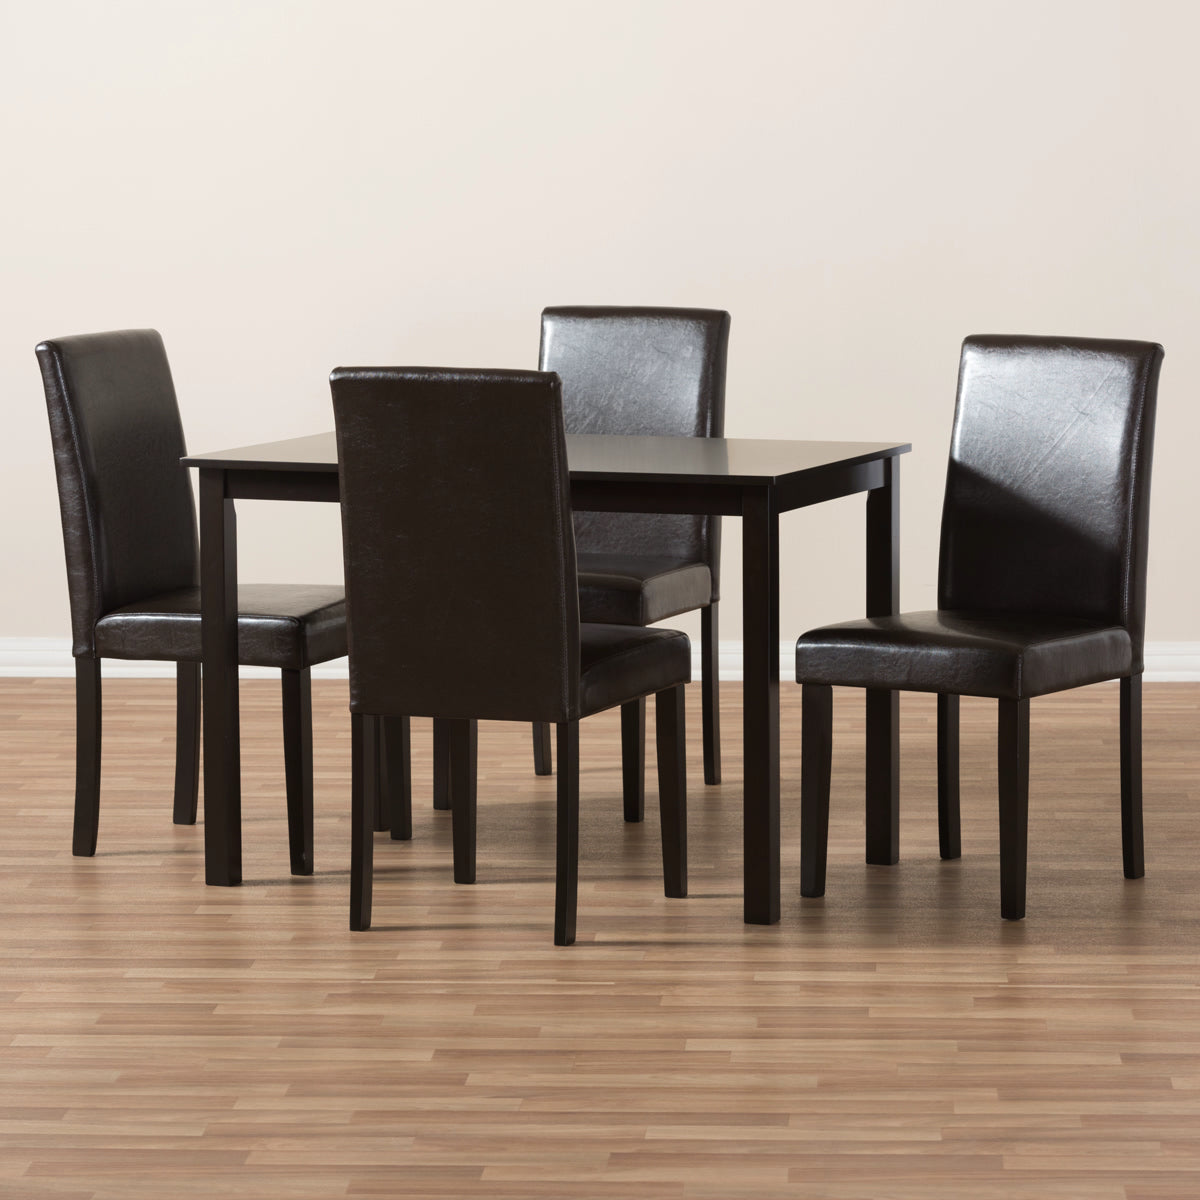 Baxton Studio Mia Modern and Contemporary Dark Brown Faux Leather Upholstered 5-Piece Dining Set Baxton Studio-0-Minimal And Modern - 6